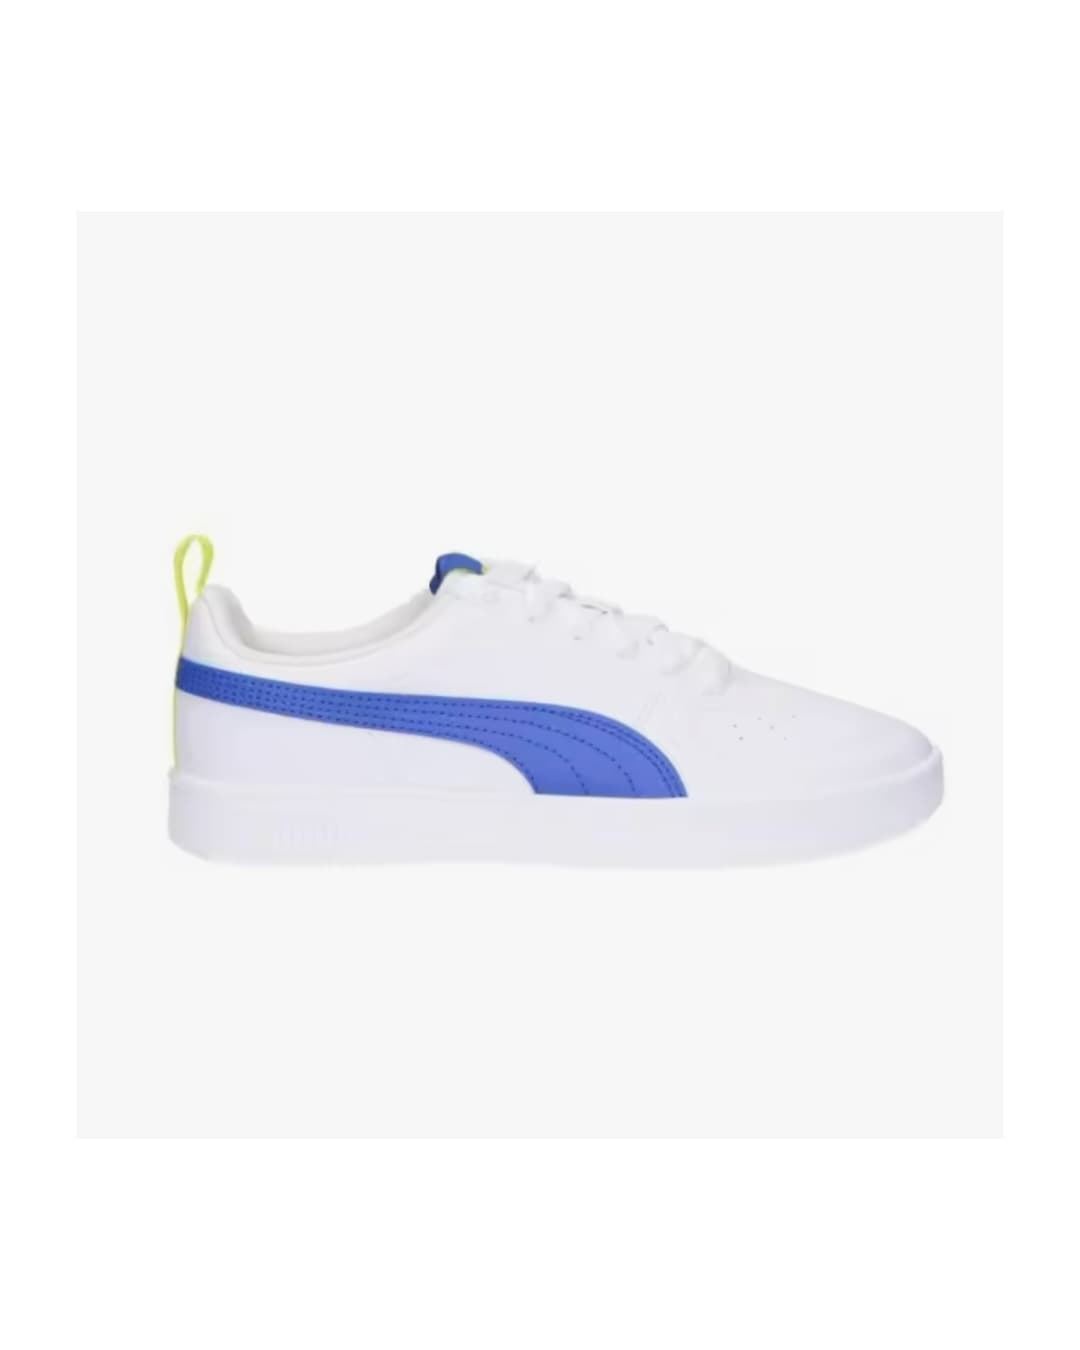 Puma Rickie Jr Sneakers White Blue with lace - Image 4